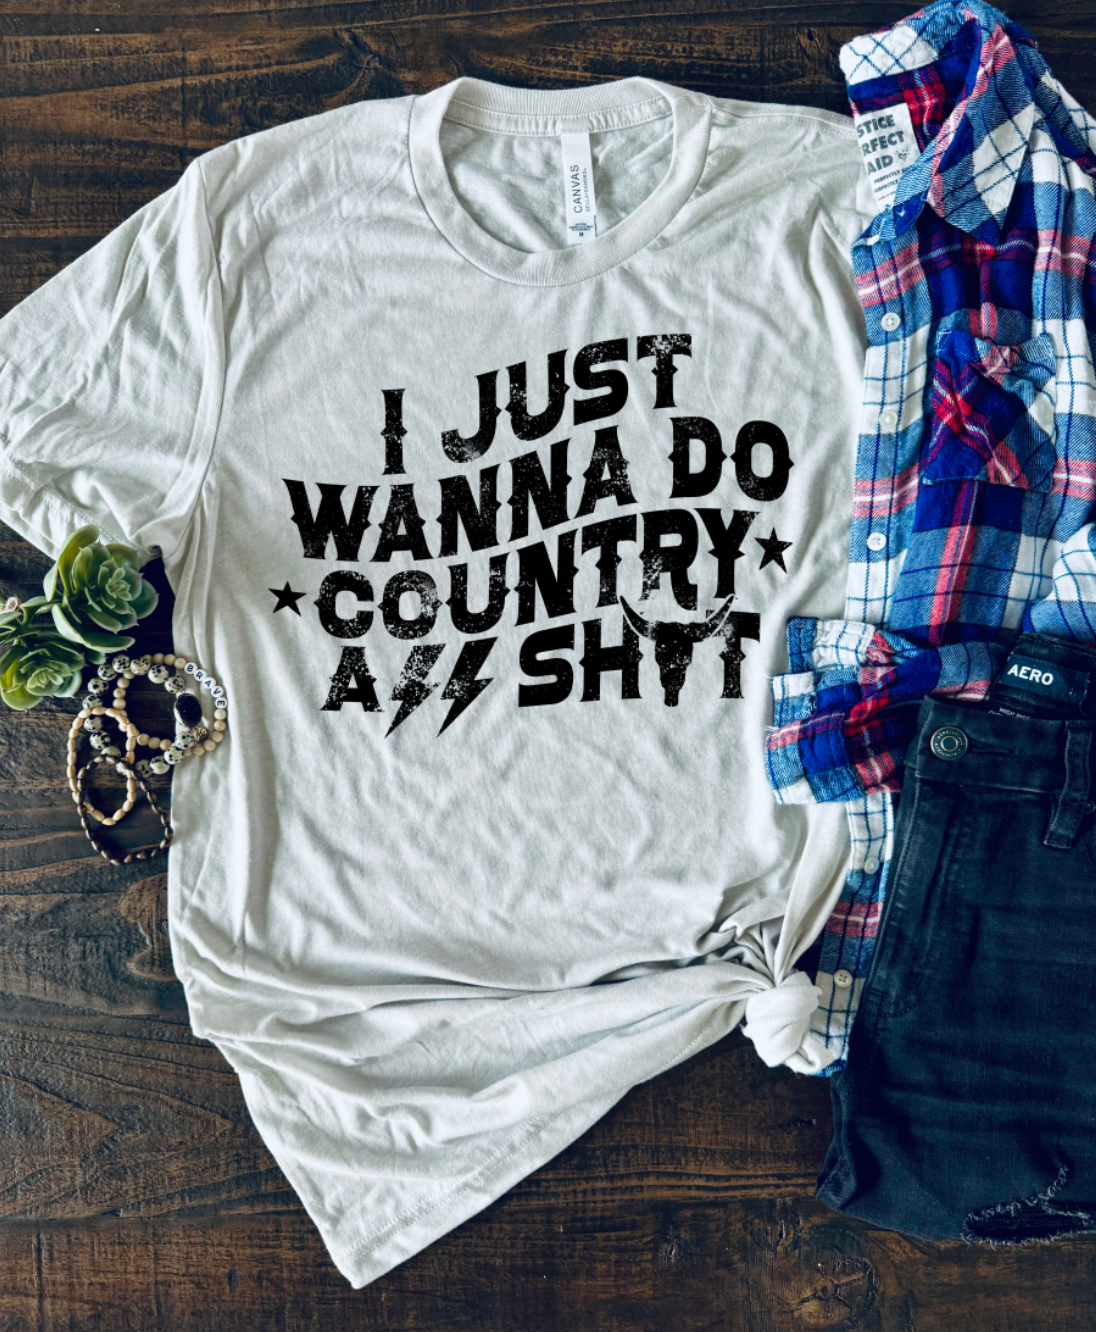 I just wanna do country ass shit, unisex bella and canvas t-shirt featuring stars, lightning bolts and longhorn in cement color.